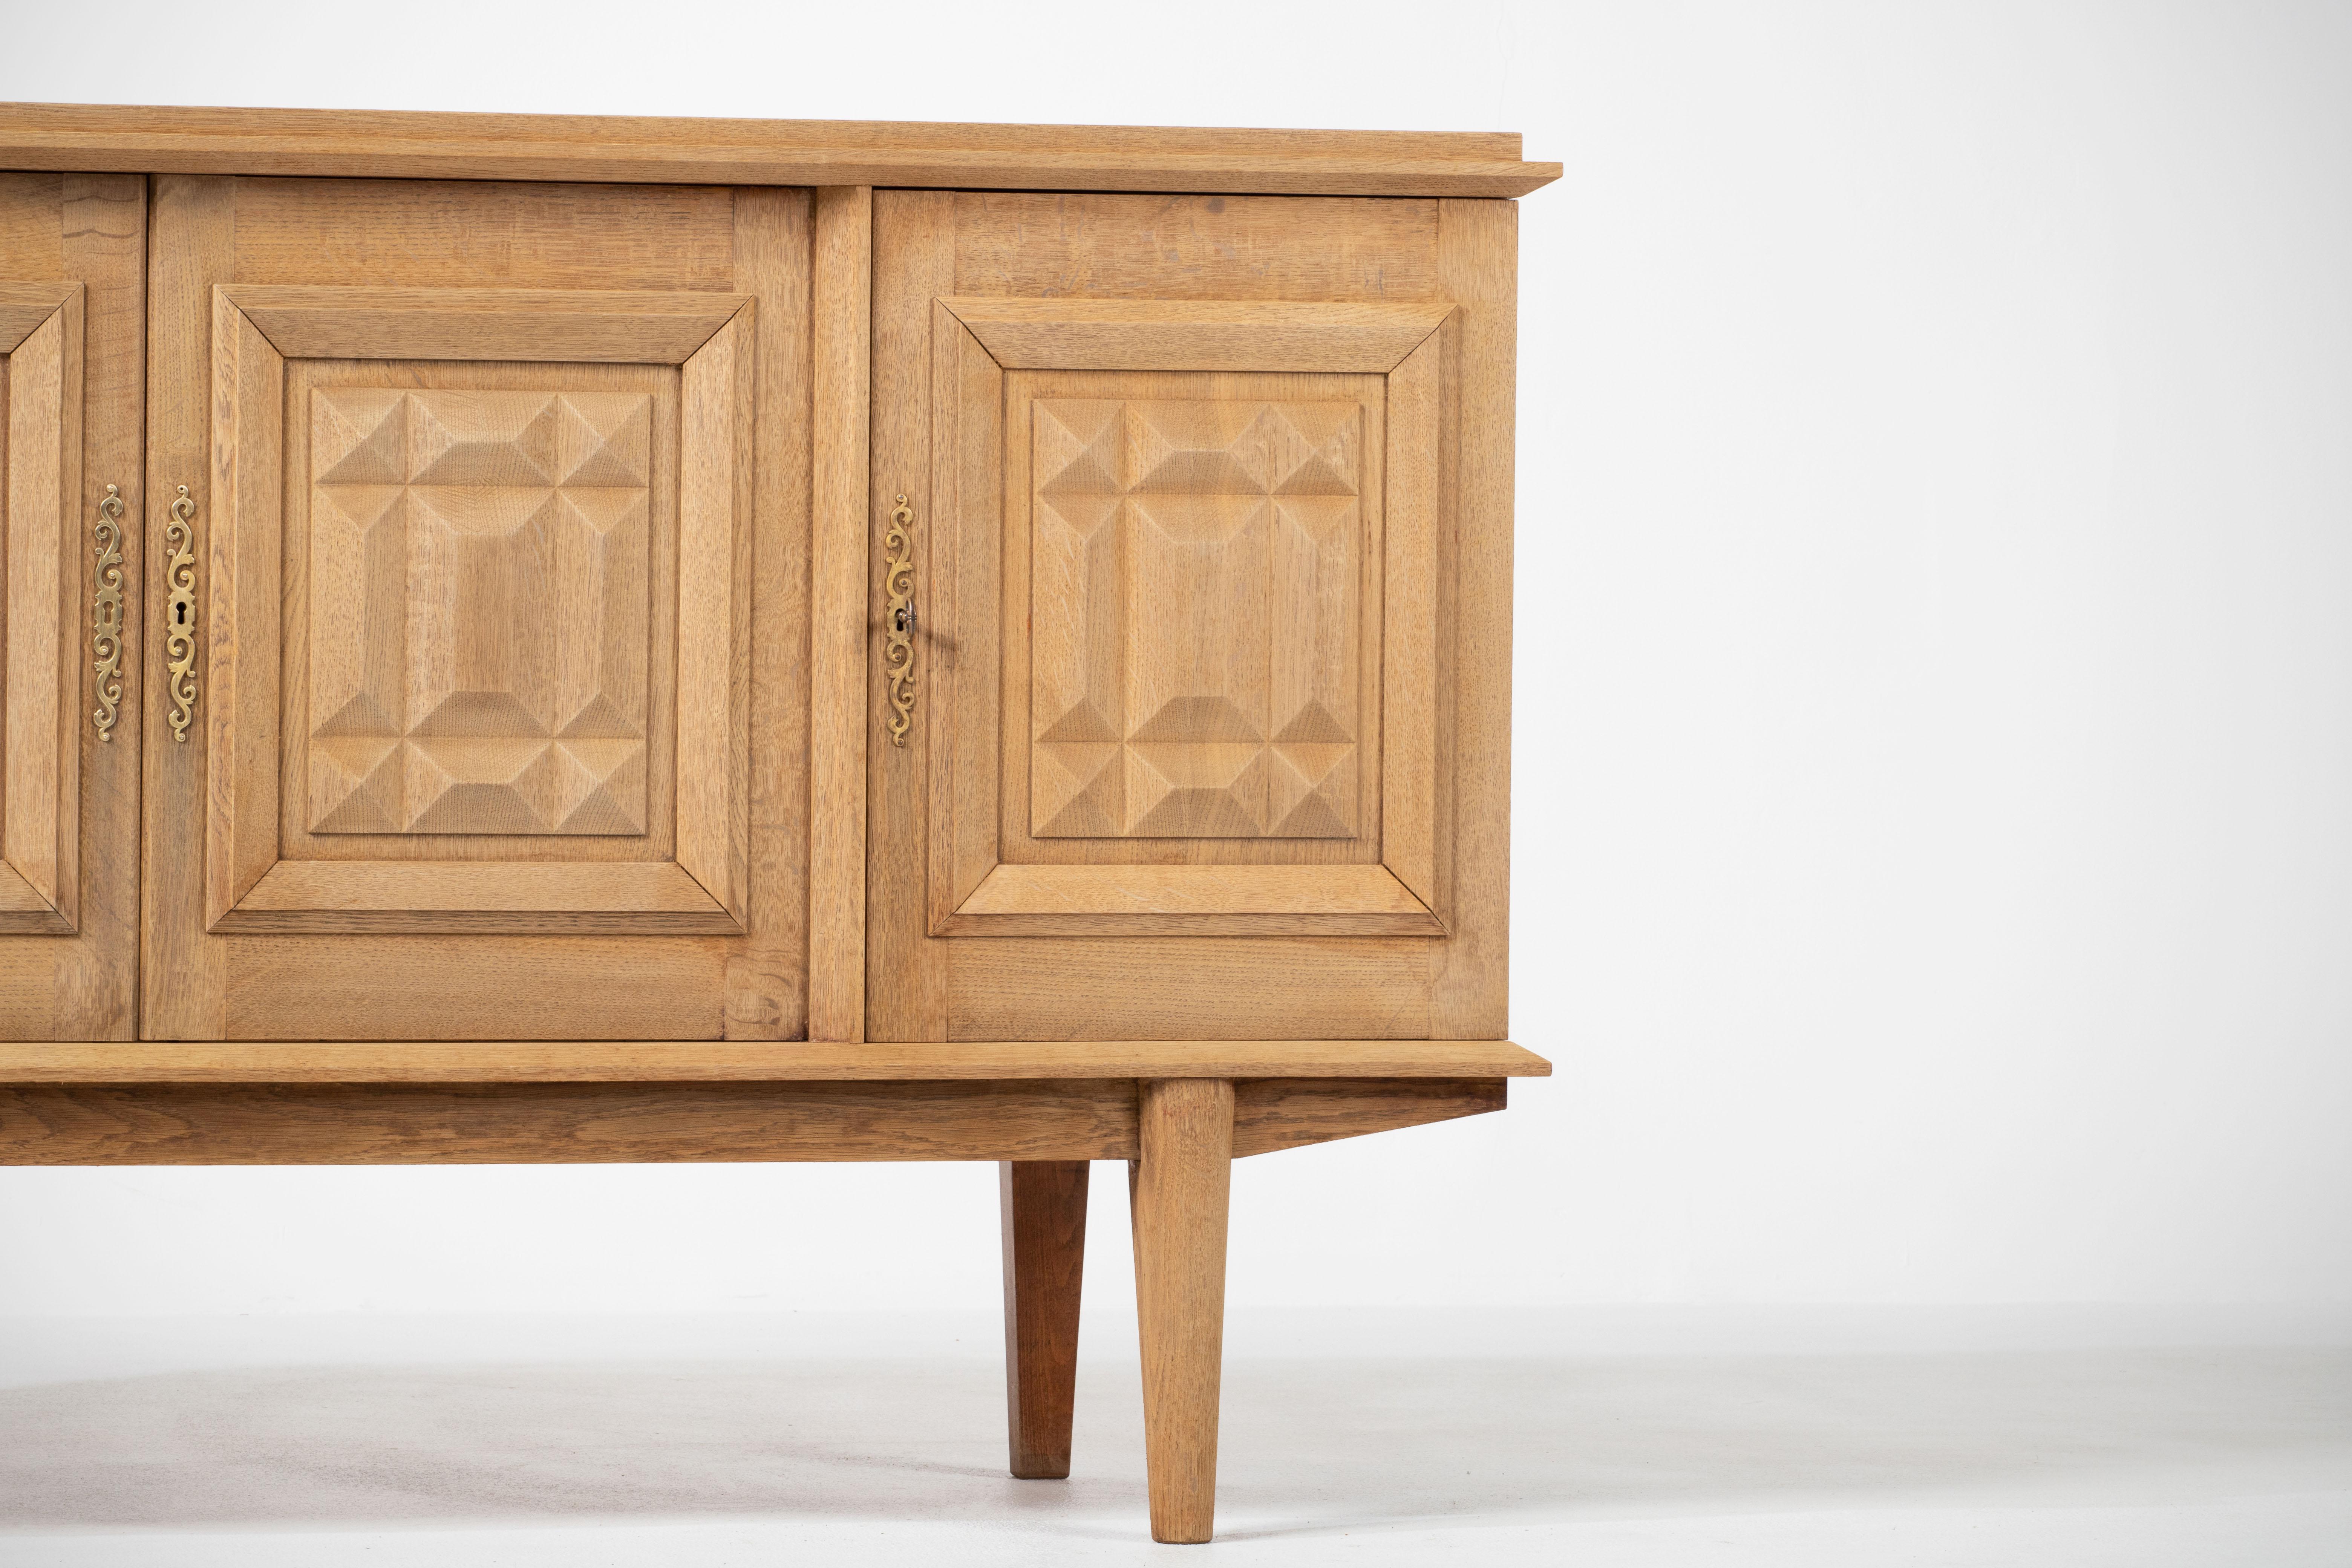 Bleached Solid Oak Credenza with Graphic Details, France, 1940s For Sale 6